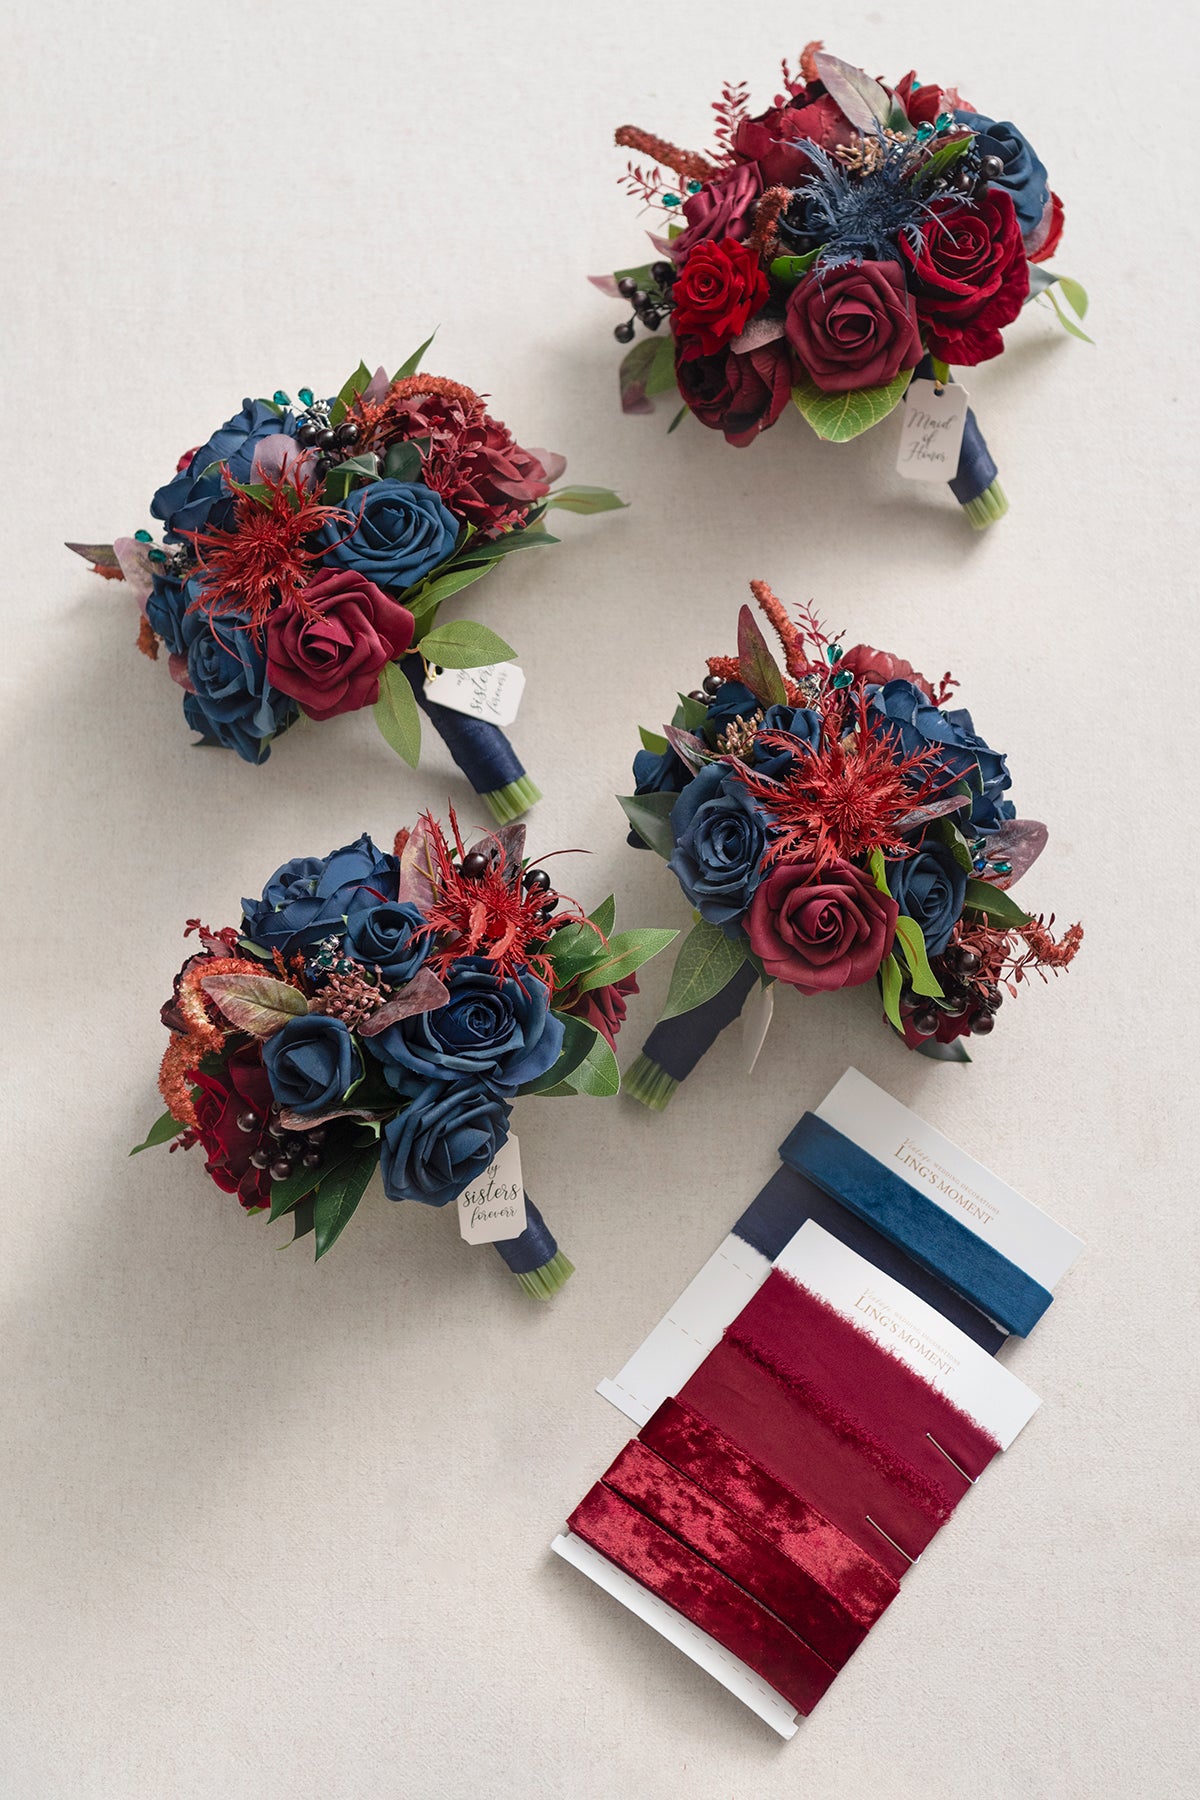 Maid of Honor & Bridesmaid Bouquets in Burgundy & Navy